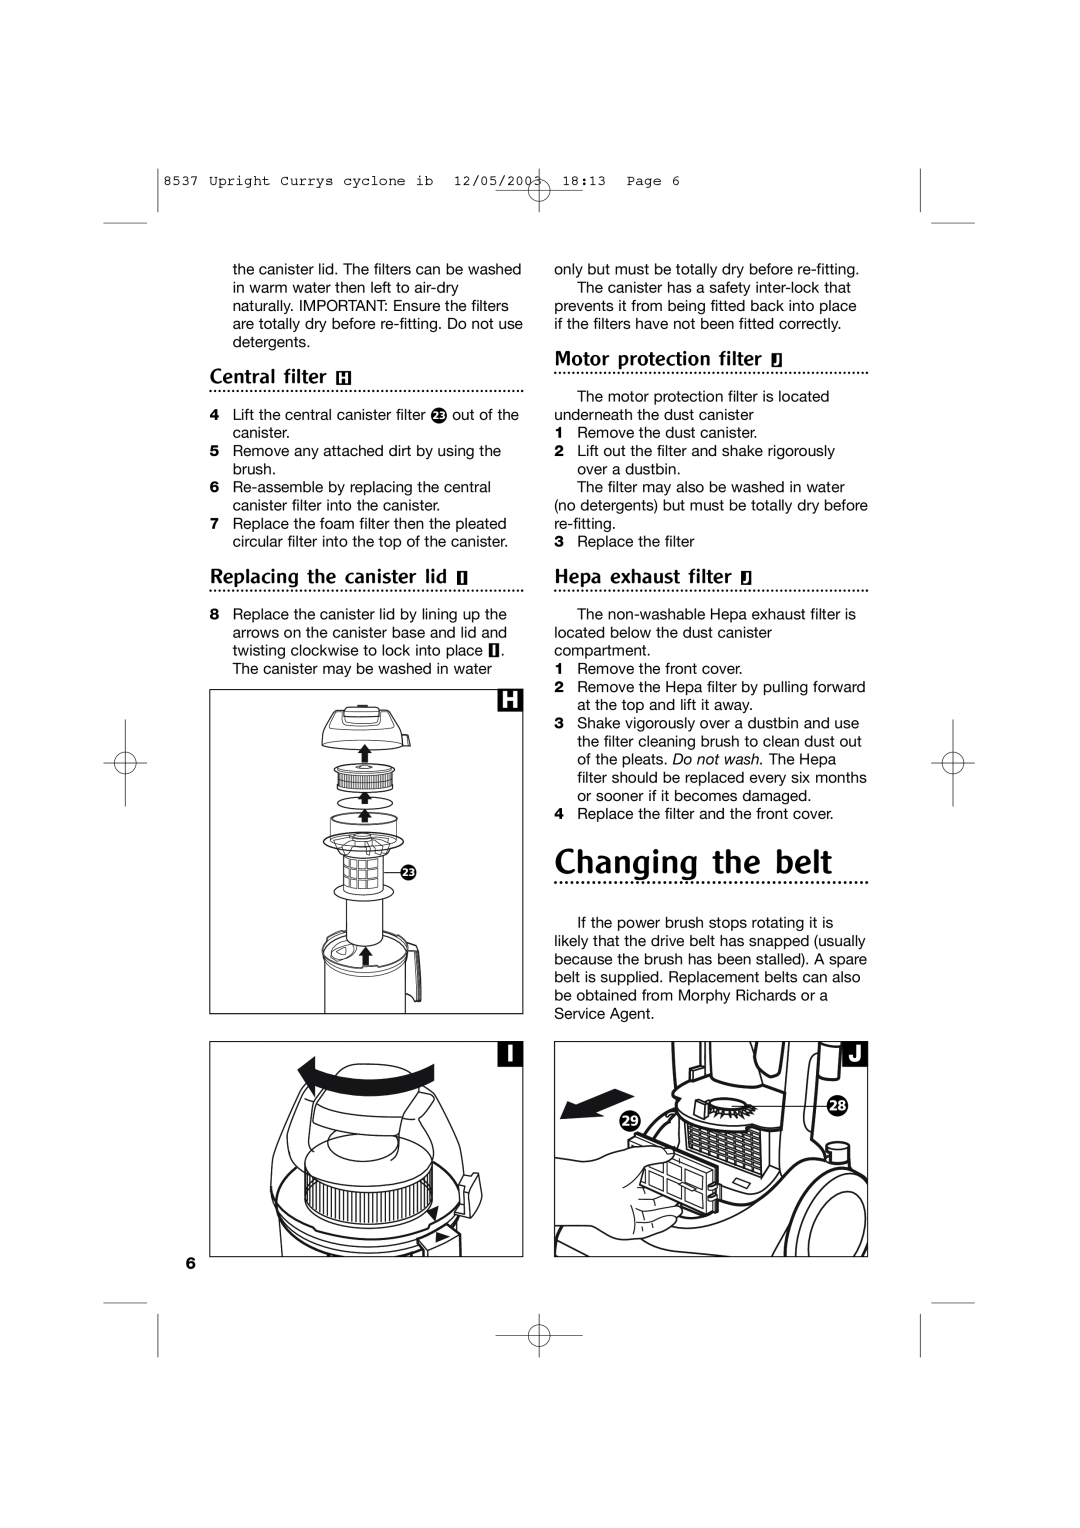 Morphy Richards 73313 manual Changing the belt, Central filter H, Motor protection filter J, Replacing the canister lid 